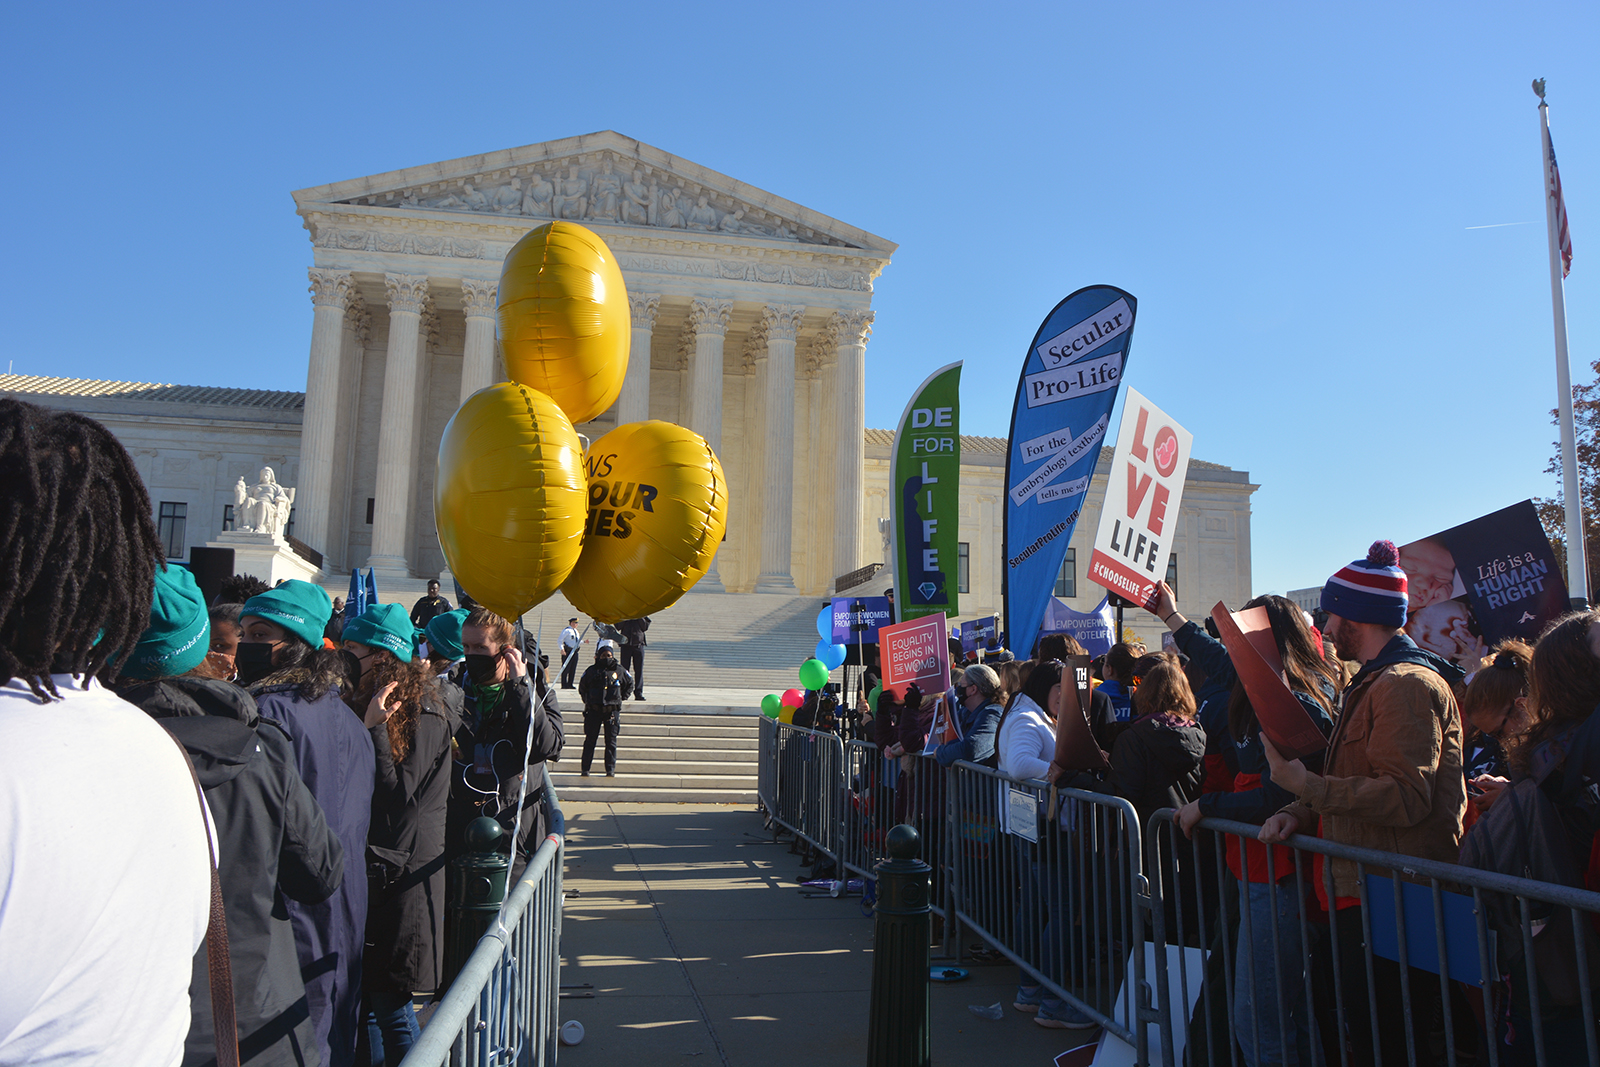 Supporters and opponents of abortion rights demonstrate outside the U.S. Supreme Court, Wednesday, Dec. 1, 2021, in Washington, D.C. RNS photo by Jack Jenkins